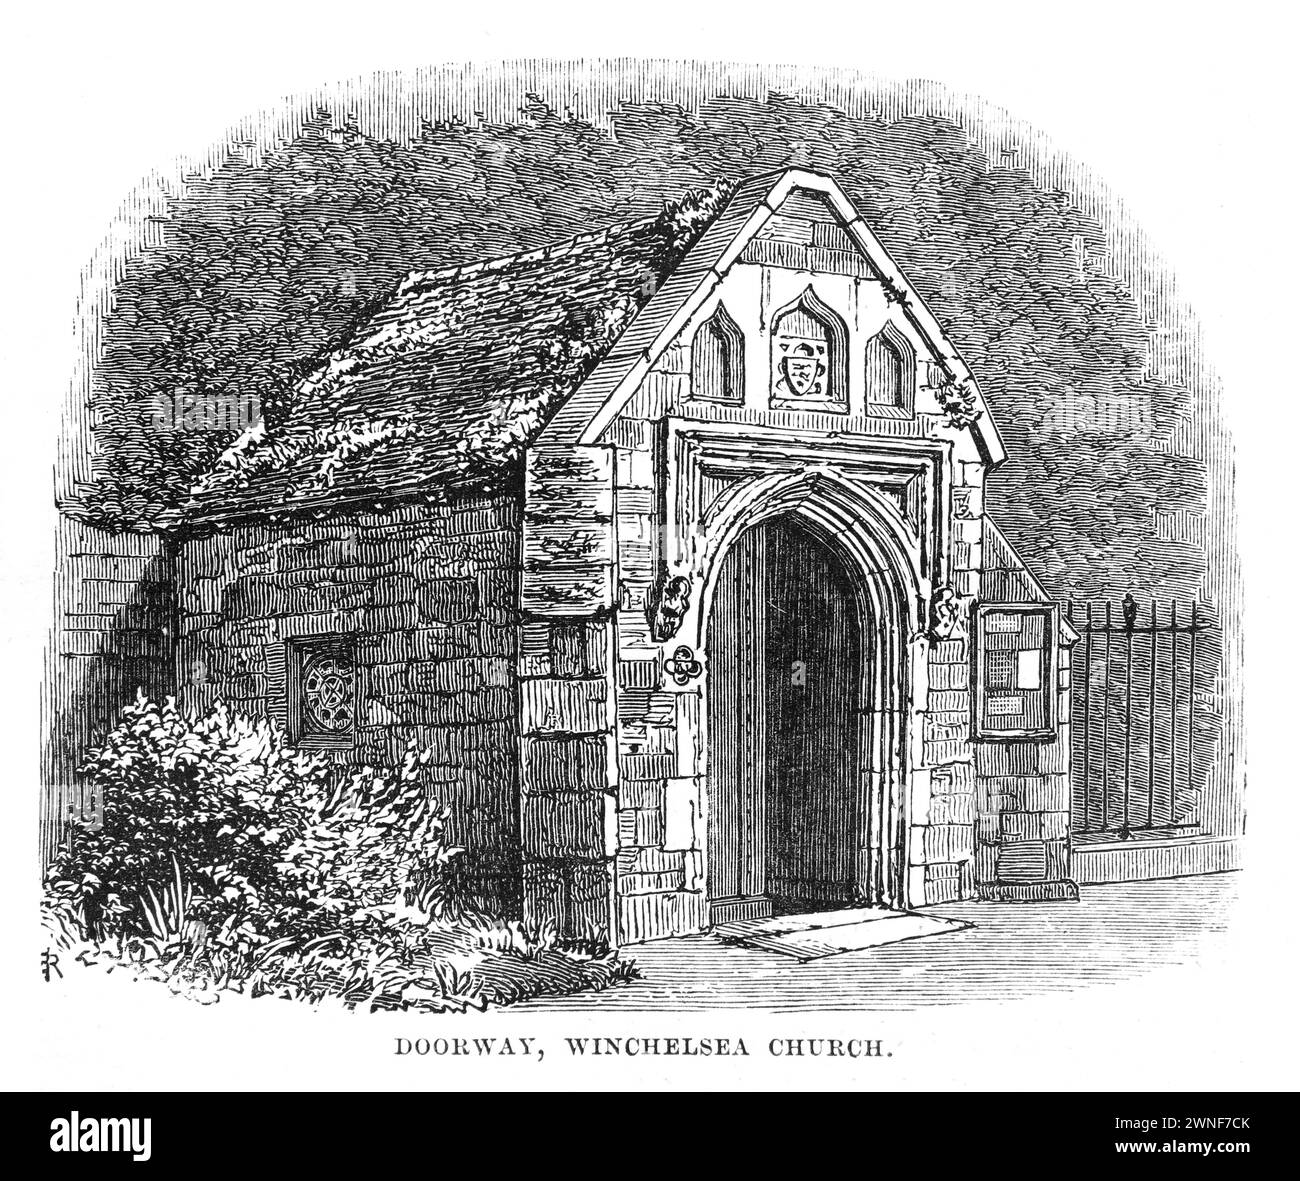 Winchelsea Church Porch, Kent; 19th century; Black and white illustration from 'Our Own Country' a Descriptive, Historical and Pictorial guide to the UK published in late 1880s by Cassell, Petter, Galpin & Co. Historic pictures of Briatin. Stock Photo